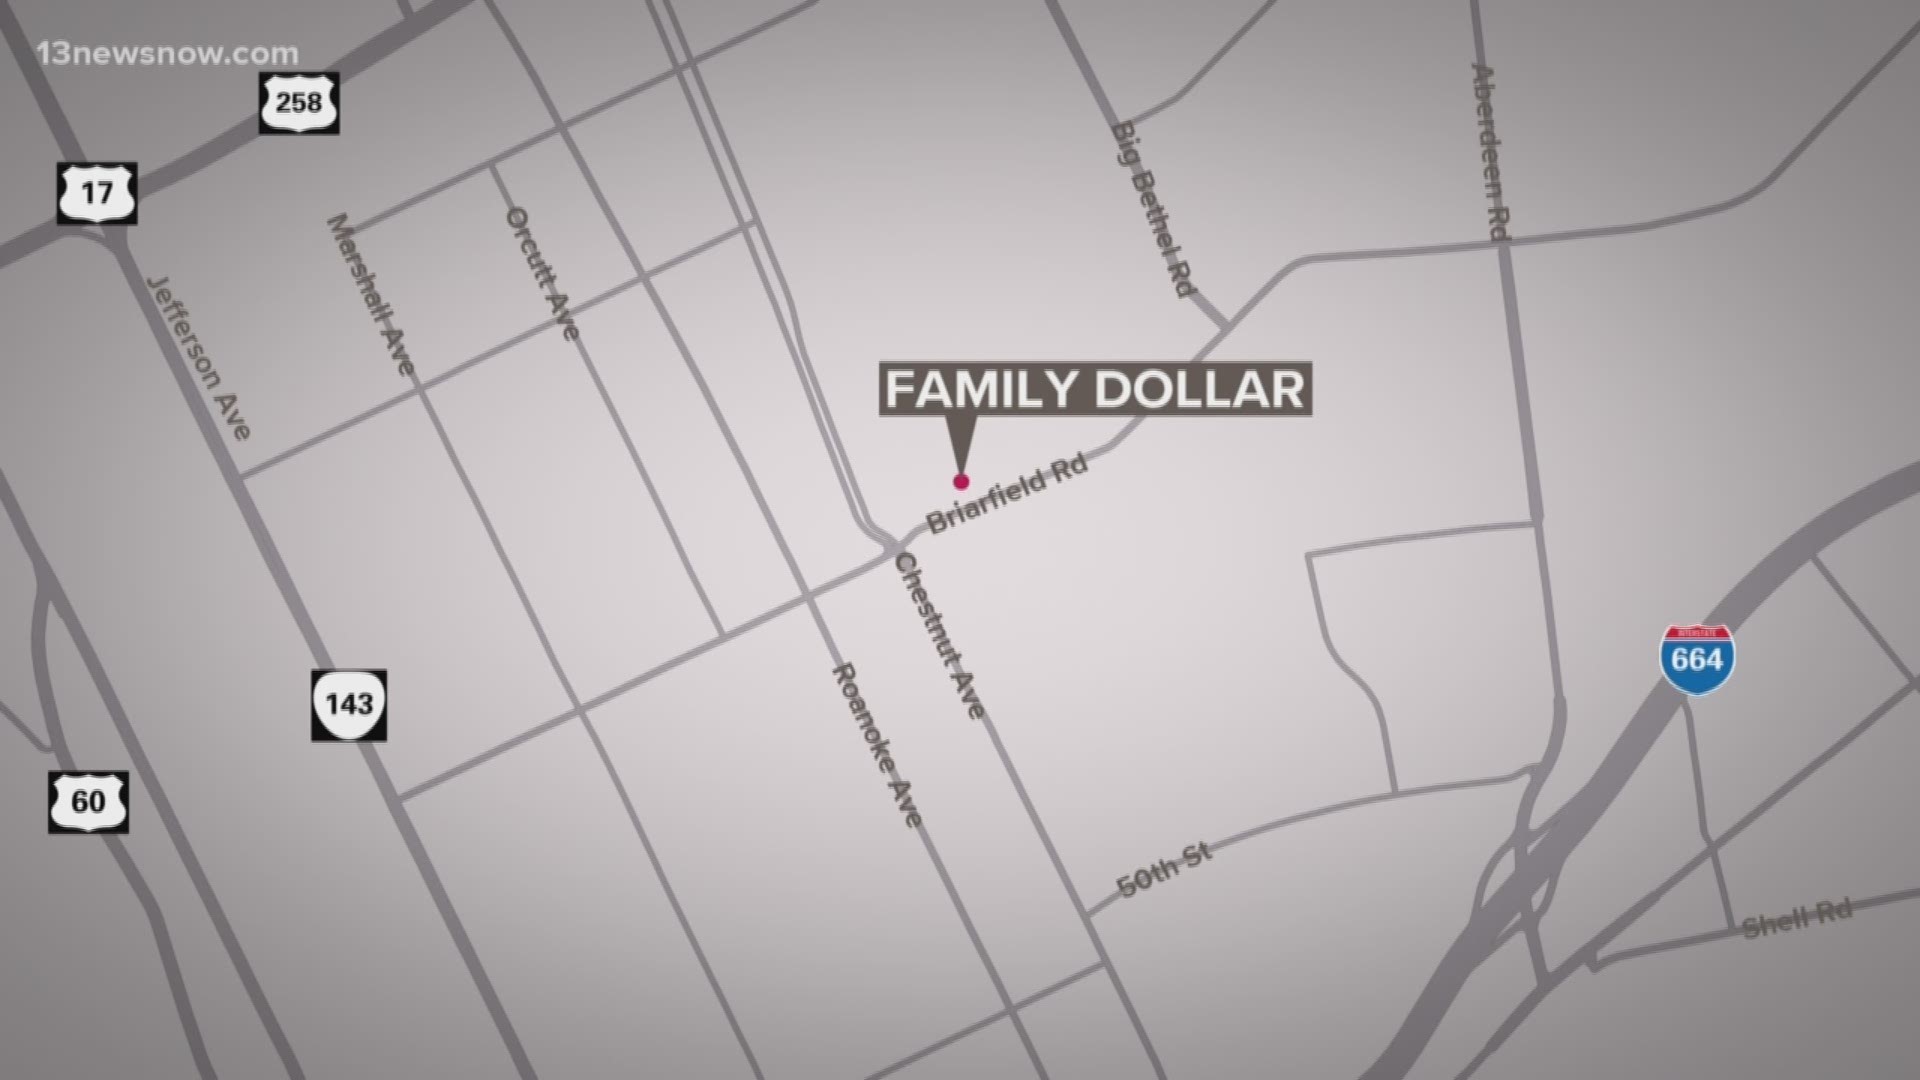 A shot was fired during a robbery in a Newport News Family Dollar.